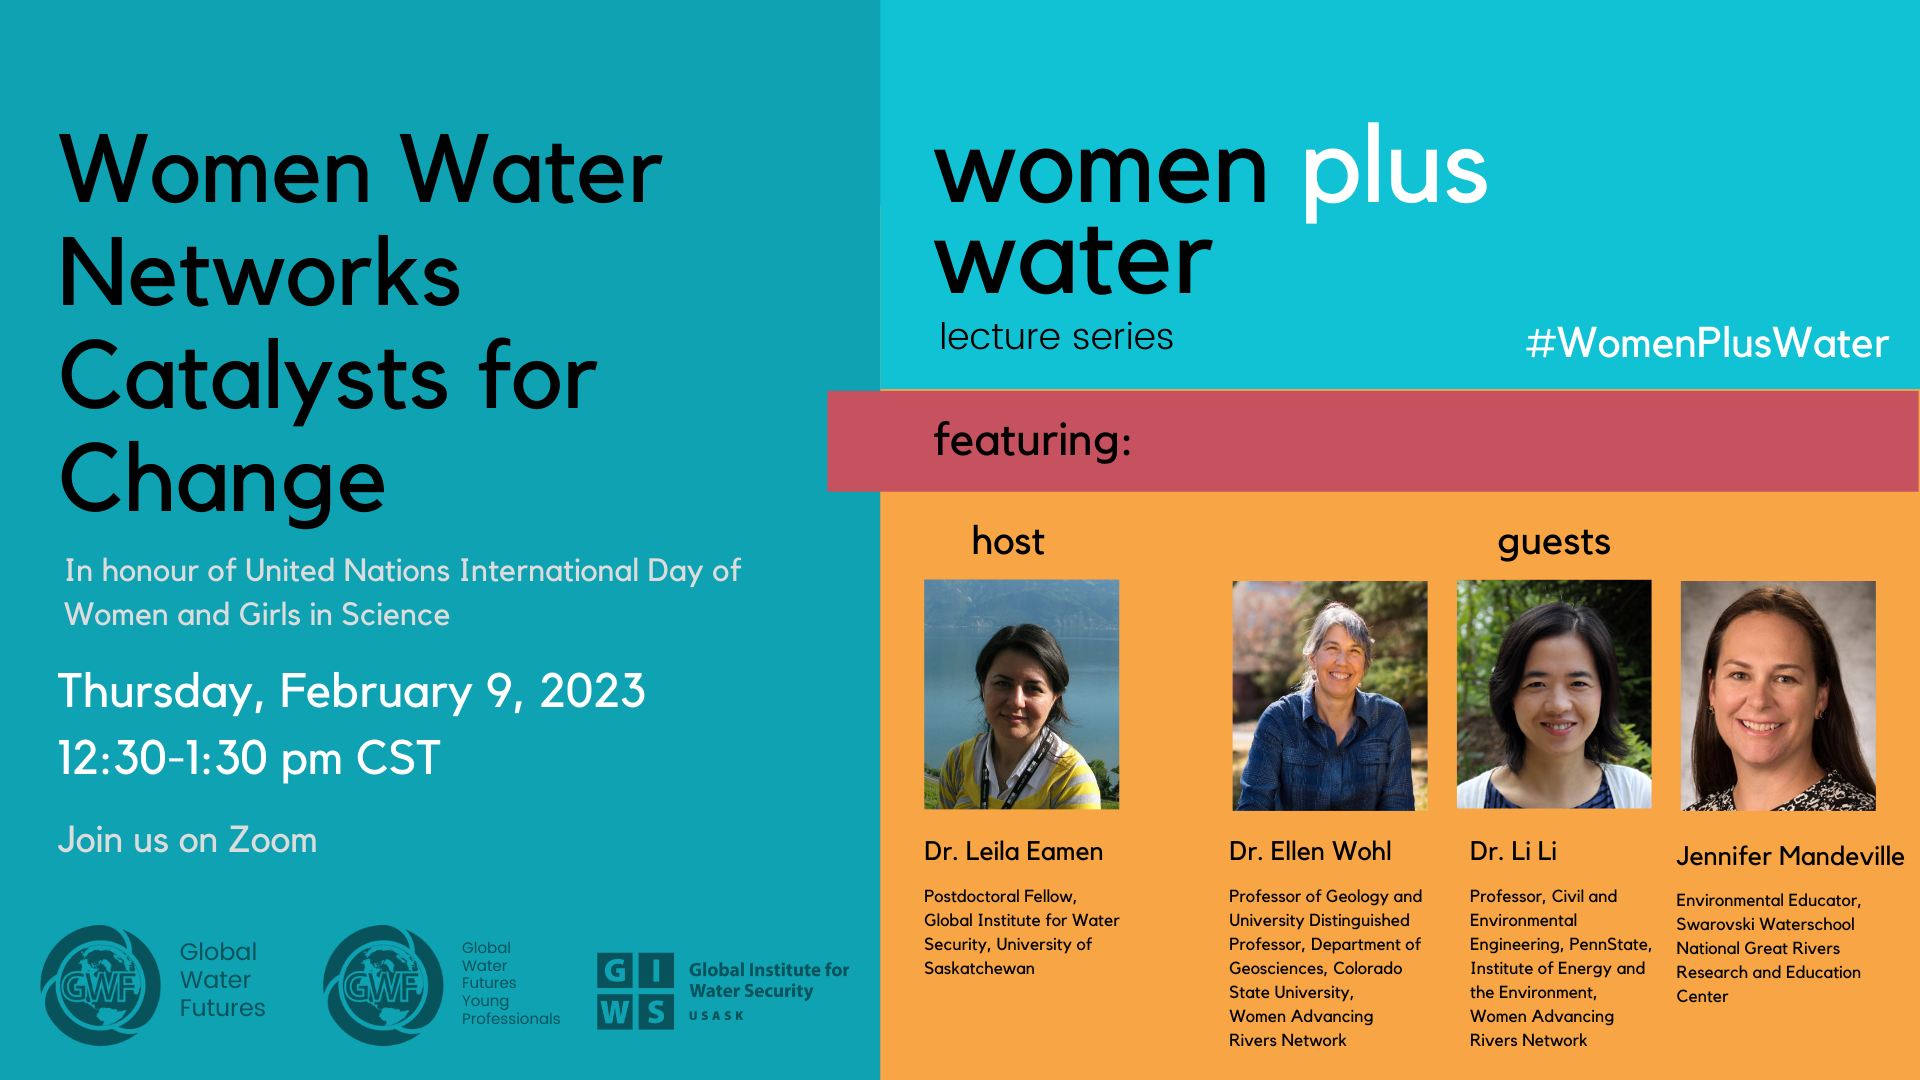 Women Water Networks Catalysts for Change